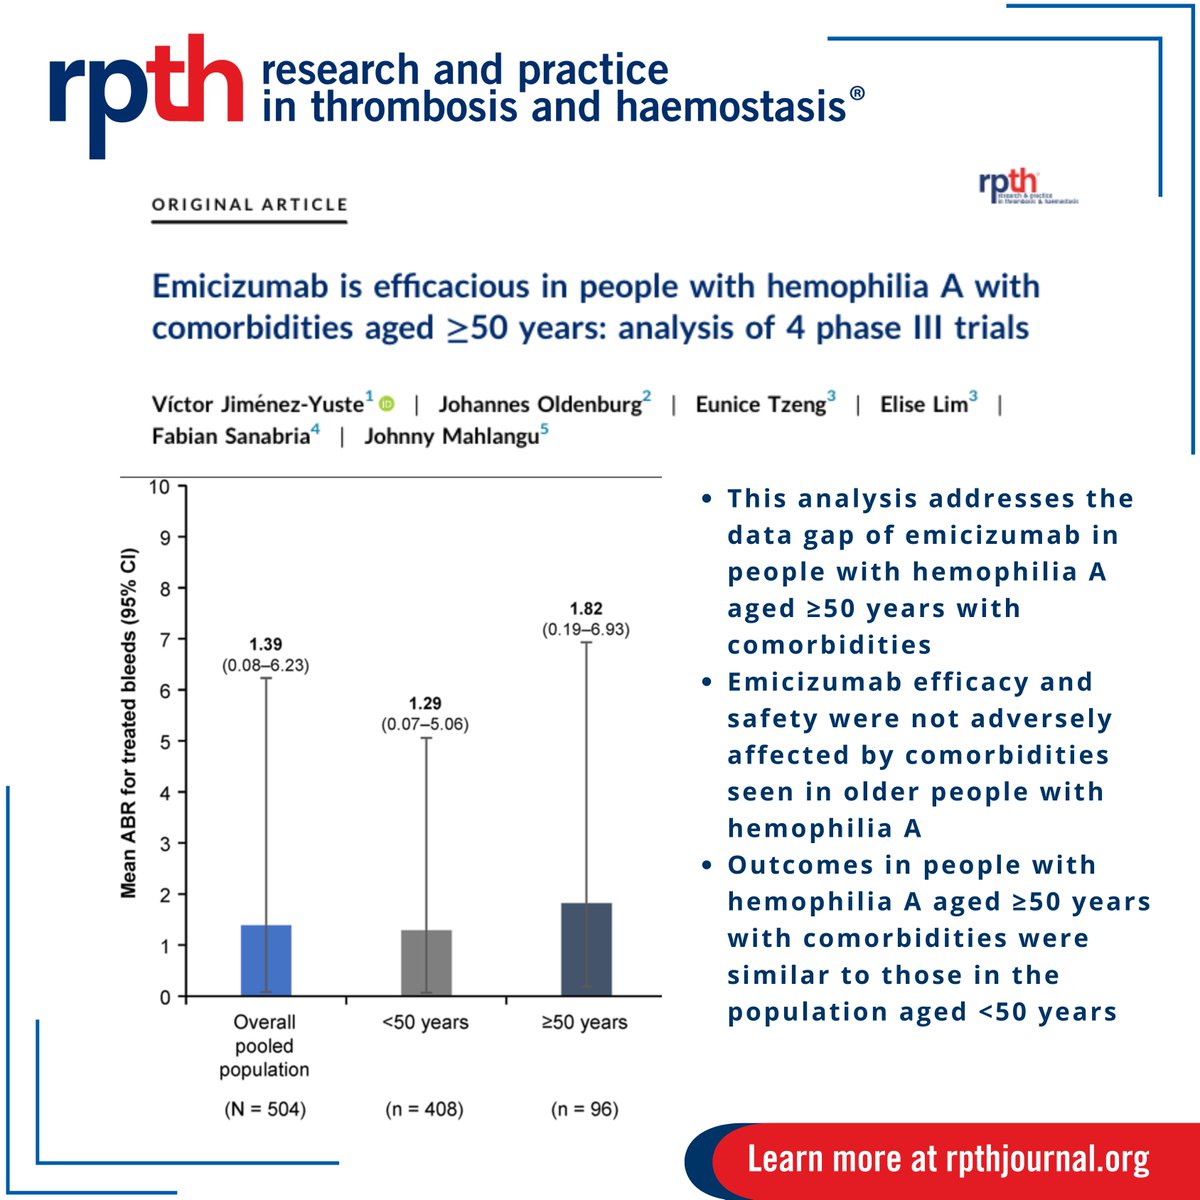 In this #RPTH Original article, authors report efficacy and safety analysis of Emicizumab in older people with #hemophilia A from 4 Phase III RCTs Key point: Outcomes similar to those in the population aged <50 years. Read here: rpthjournal.org/article/S2475-…